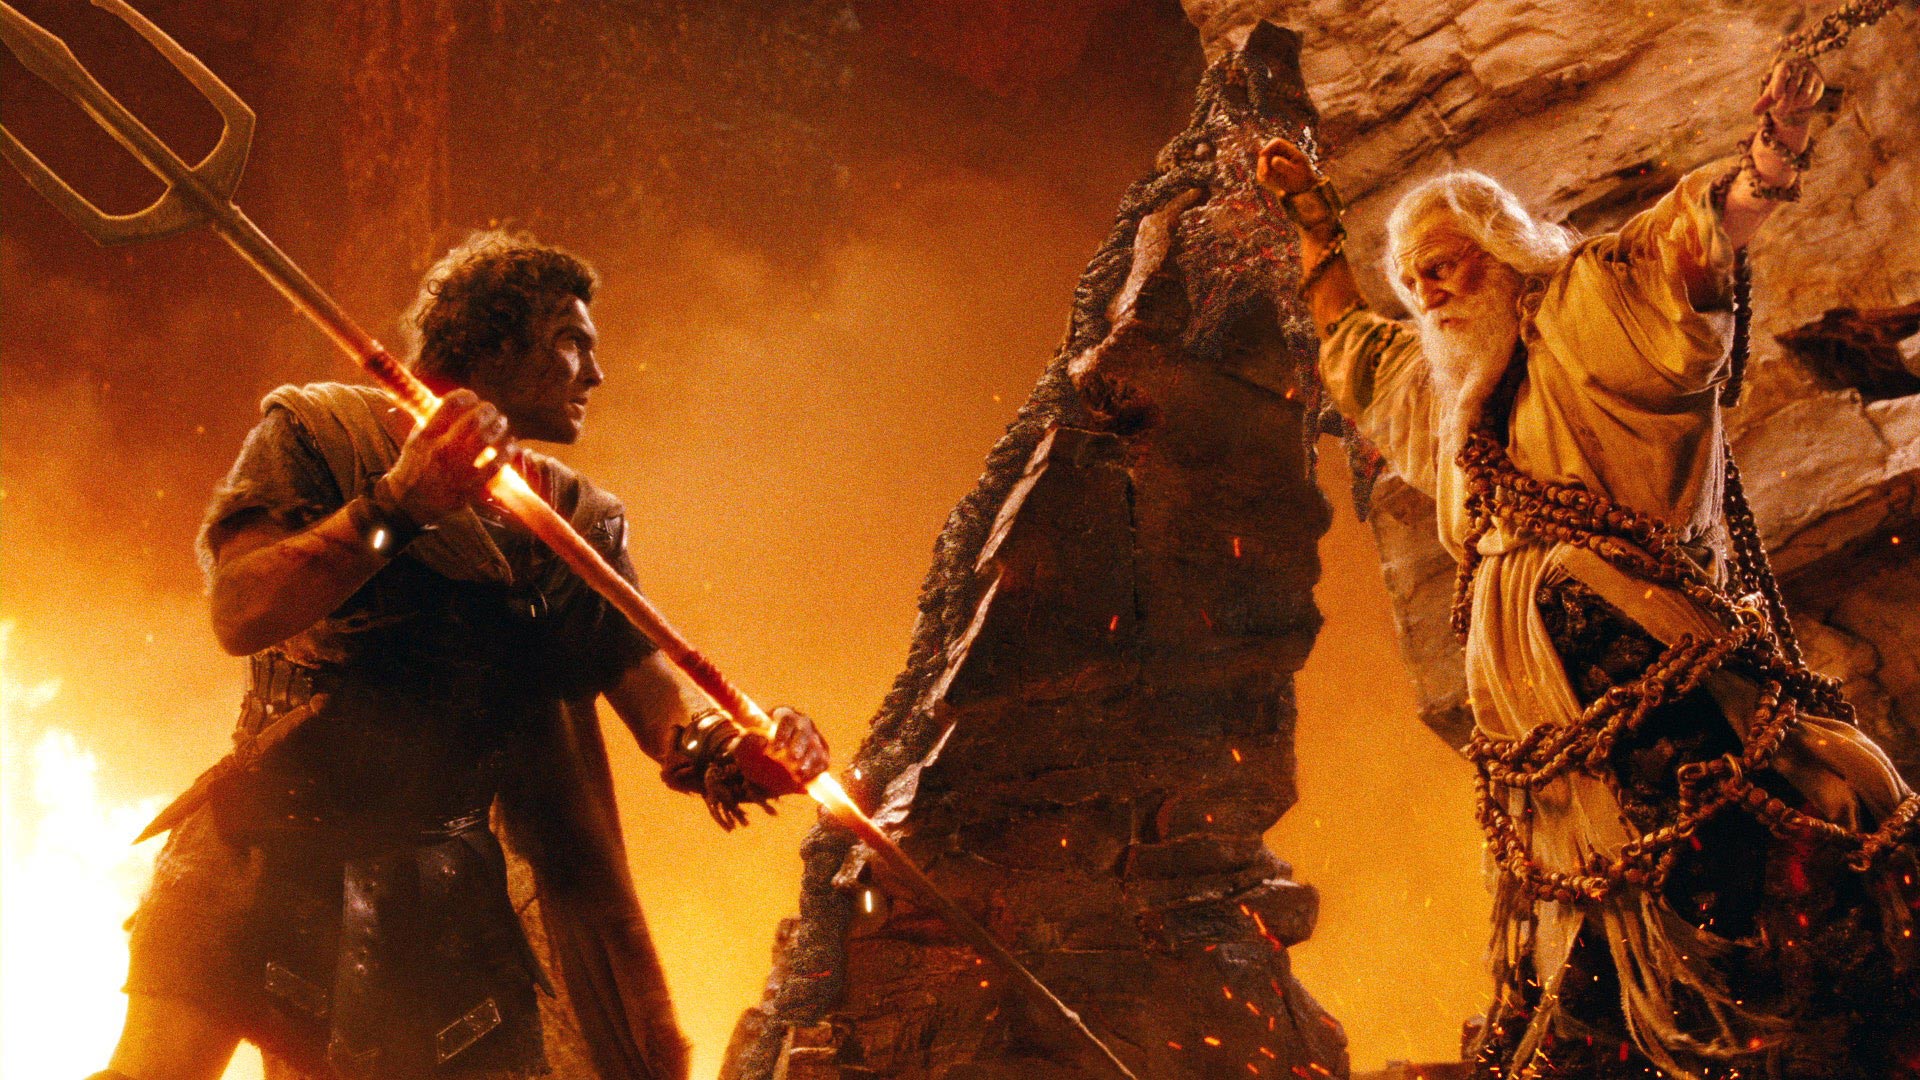 Wrath of the Titans delivers the Sword and Sorcery